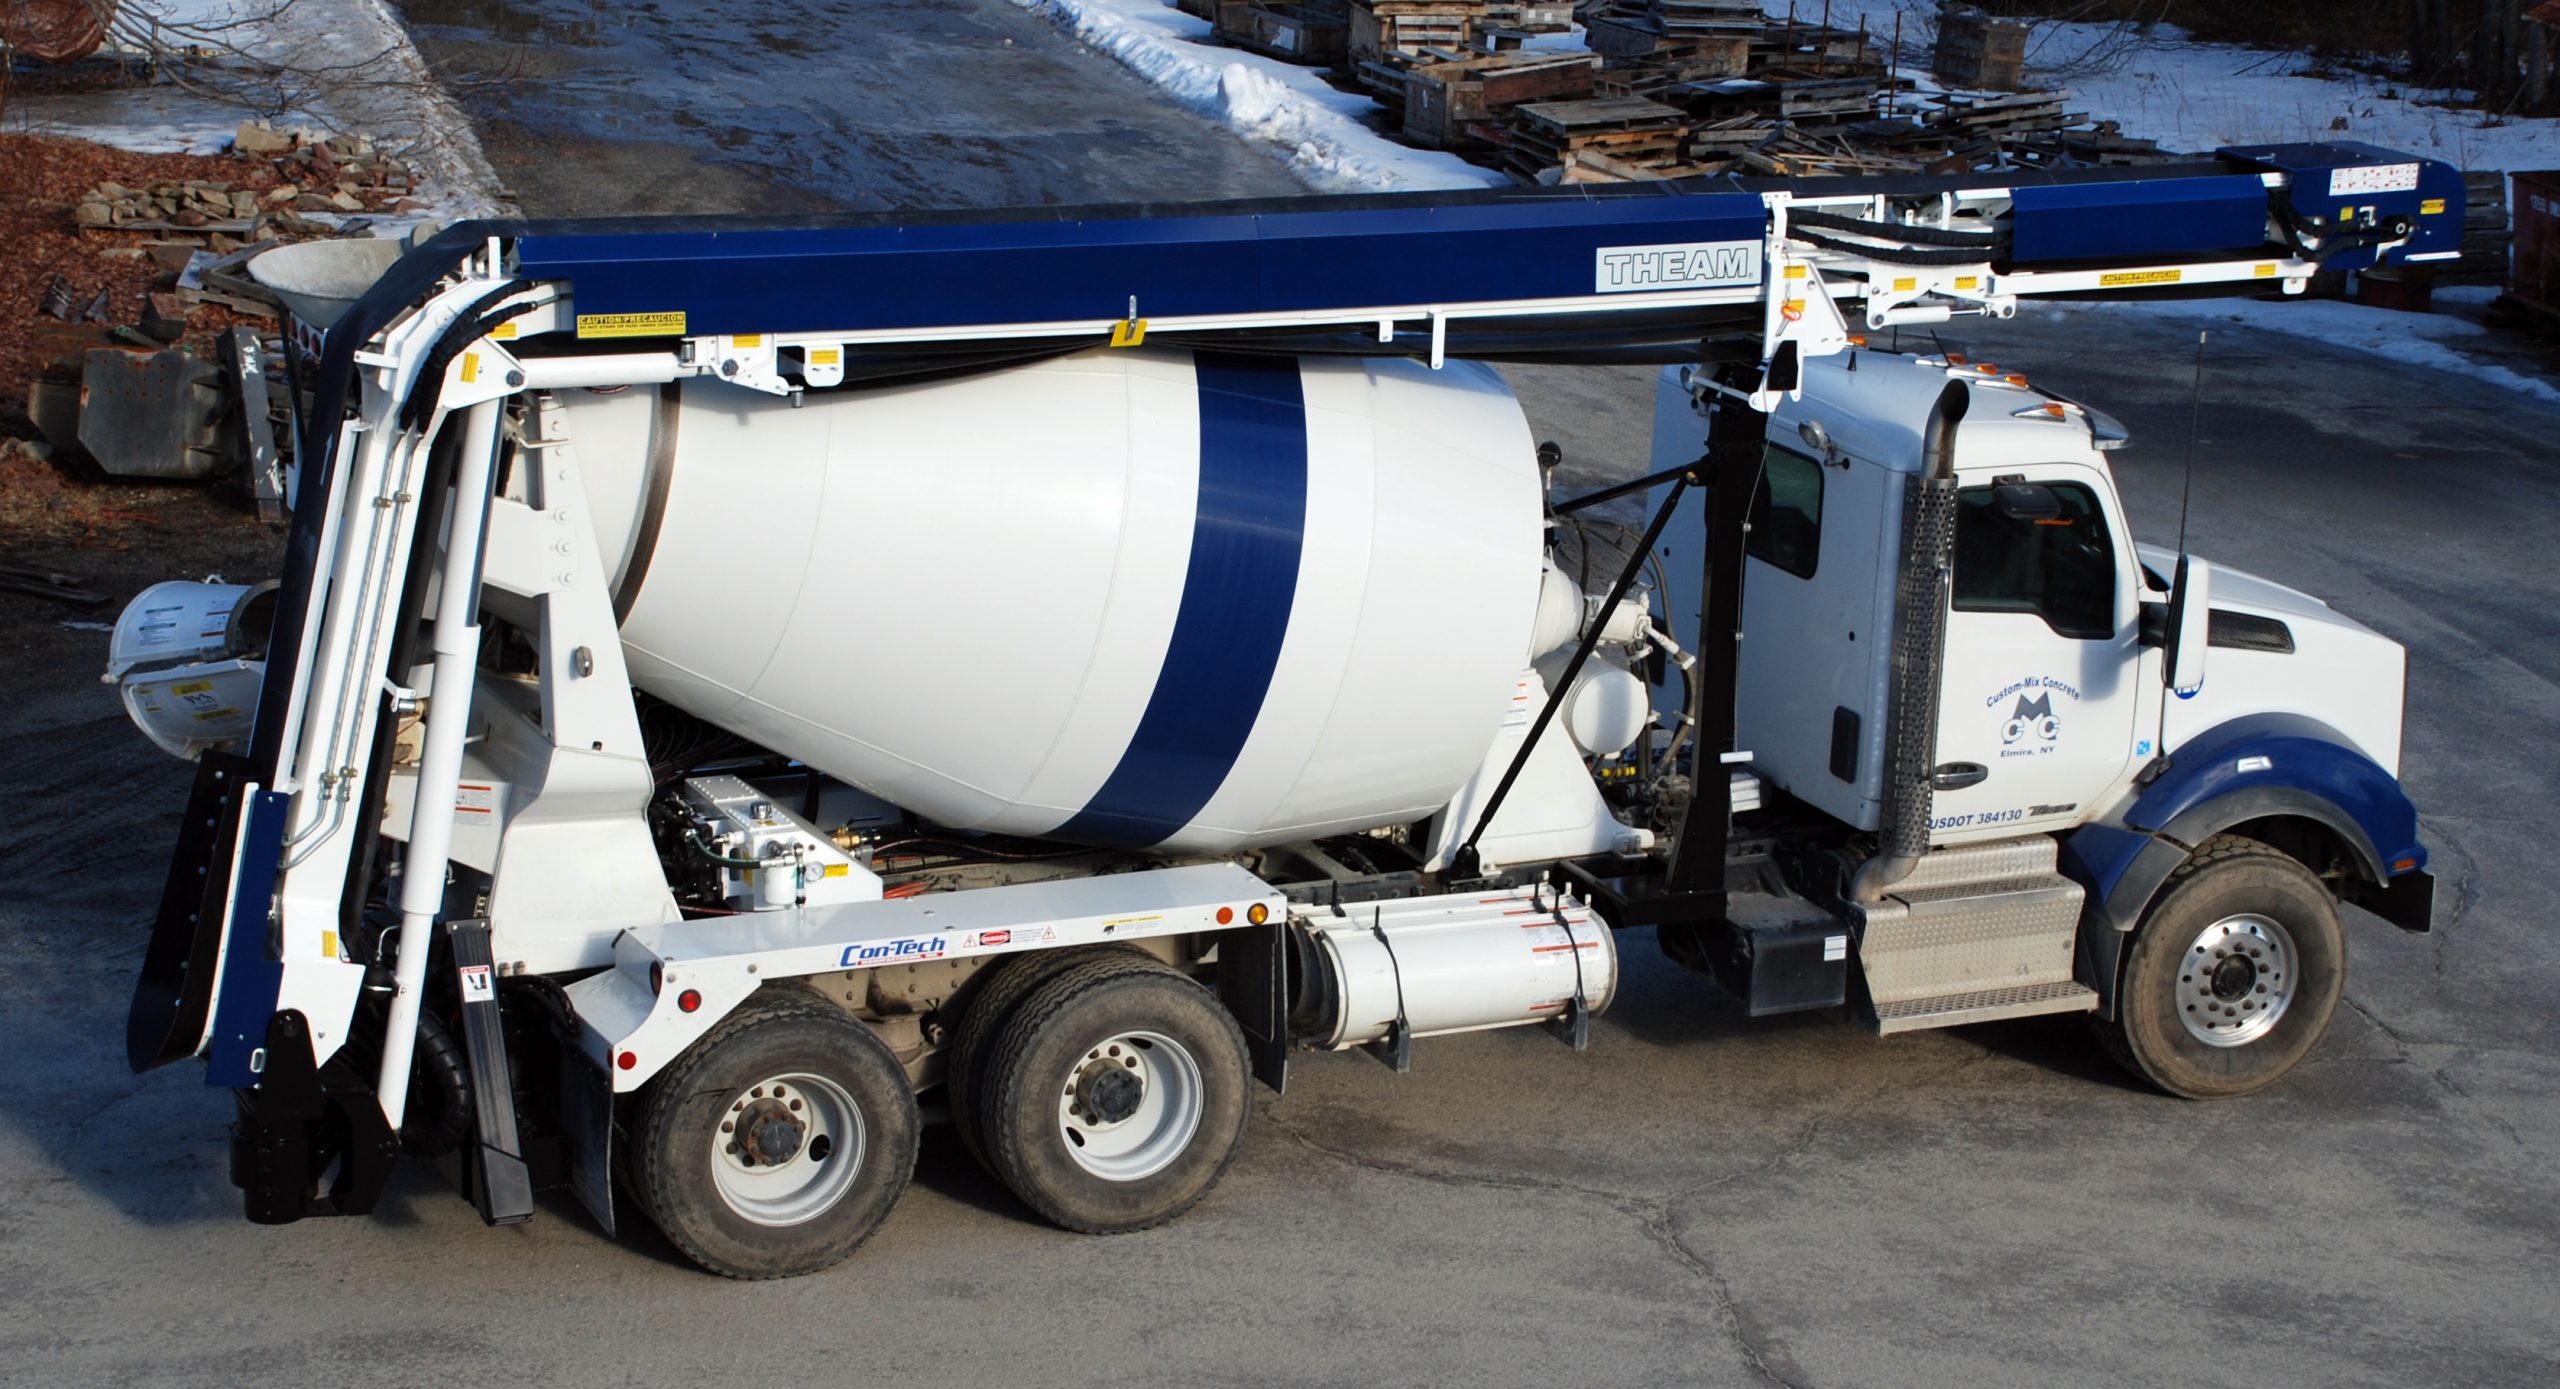 A concrete mixer truck is parked in a snowy area.